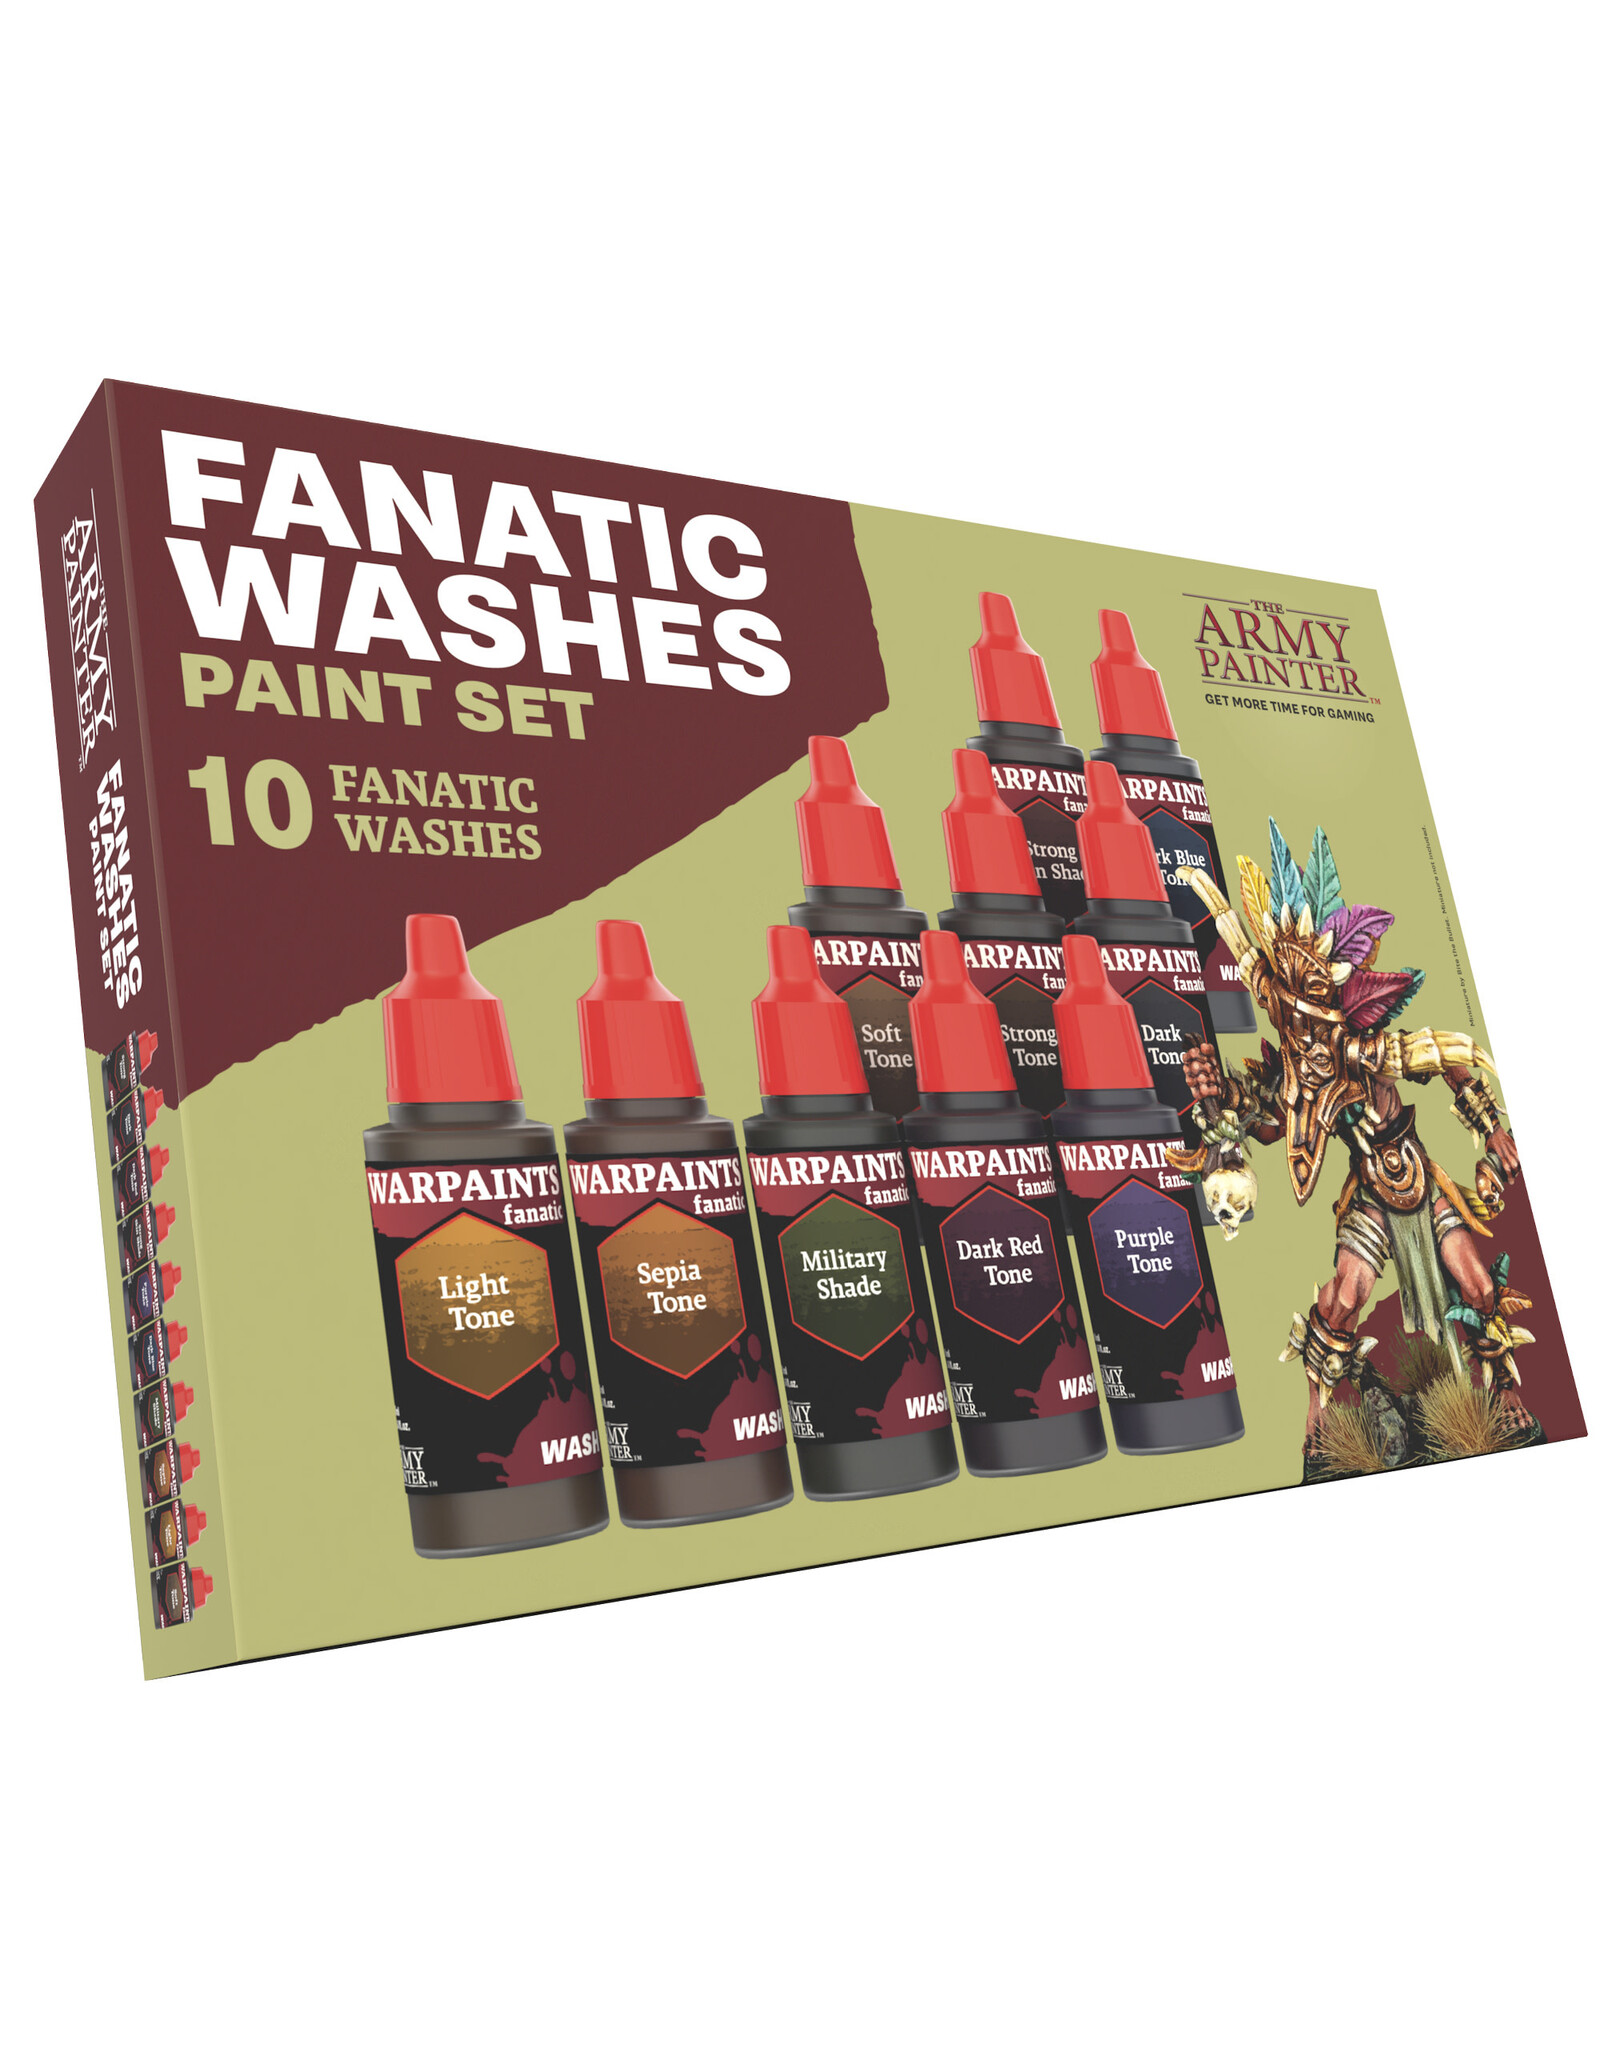 The Army Painter The Army Painter Warpaints Fanatic: Washes Paint Set